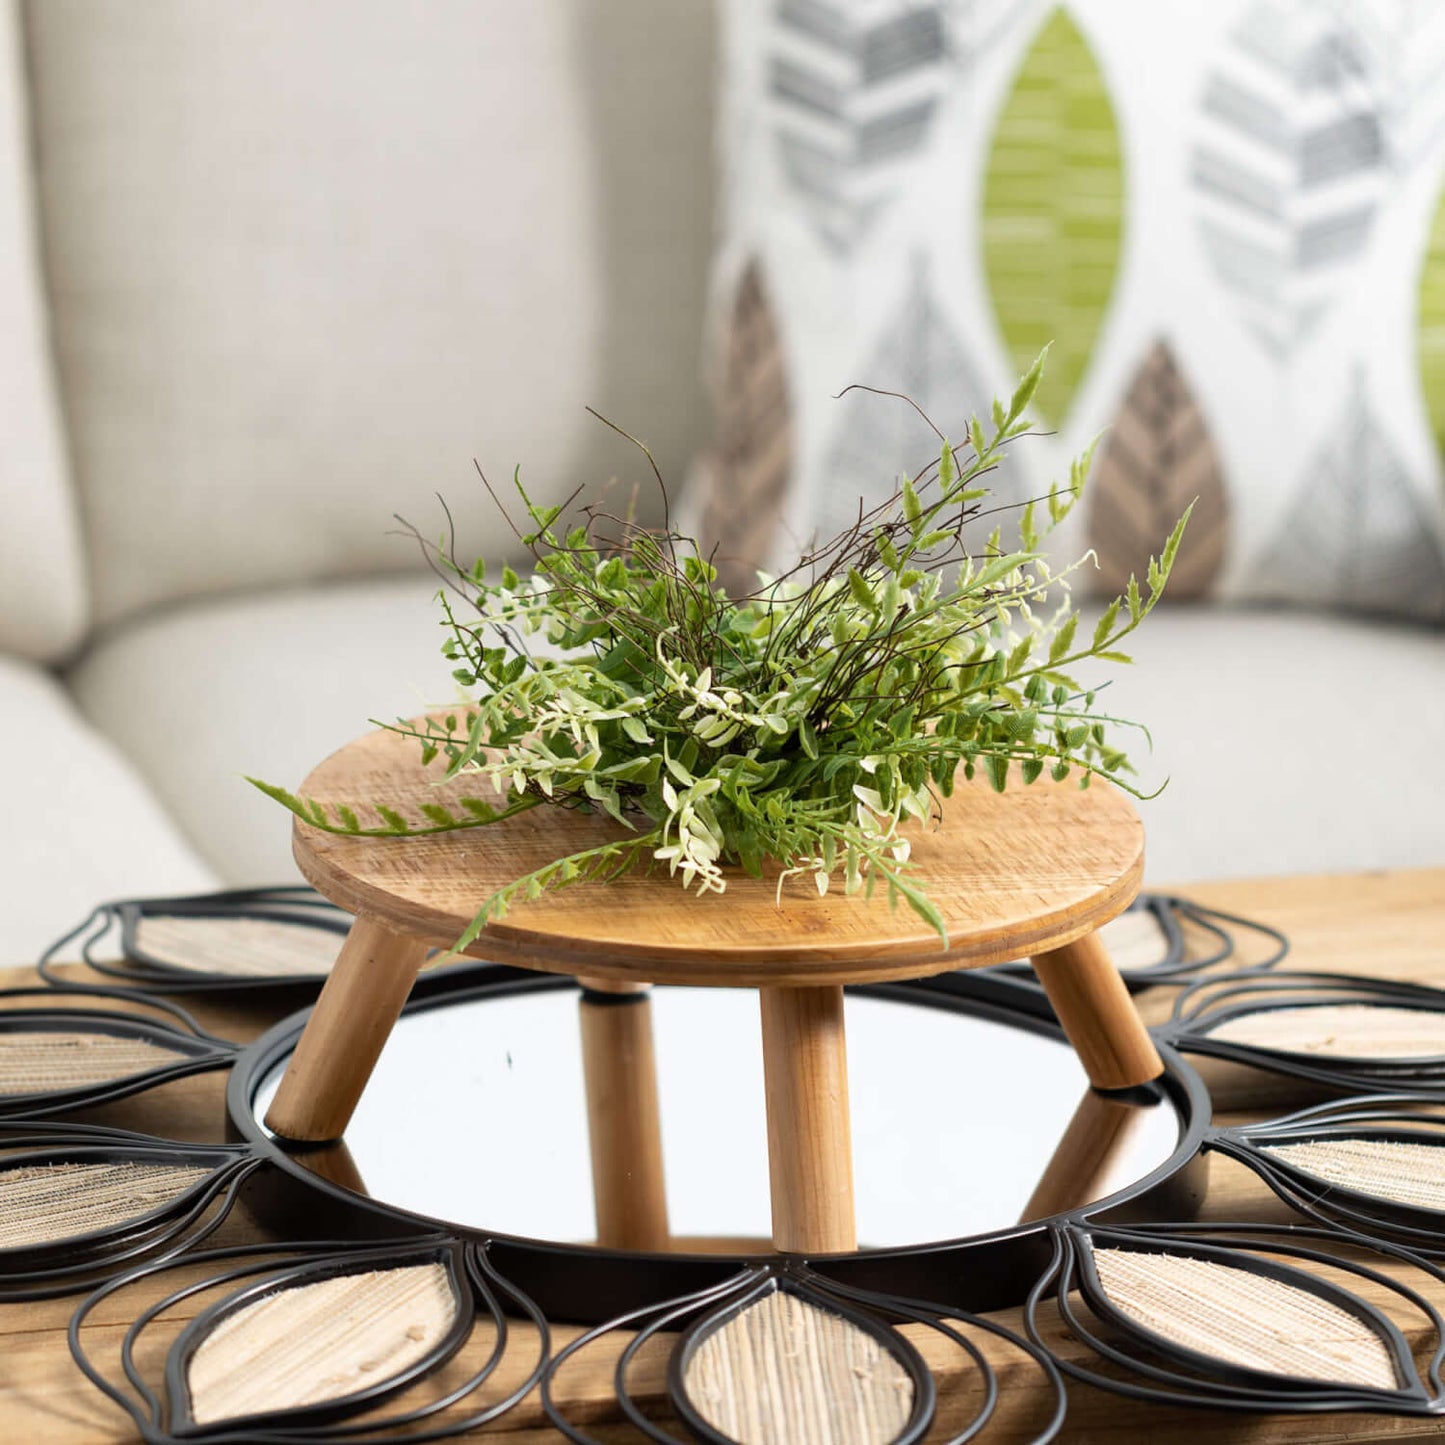 riser arranged with greenery on mirror on coffee table, couch and pillow in background.